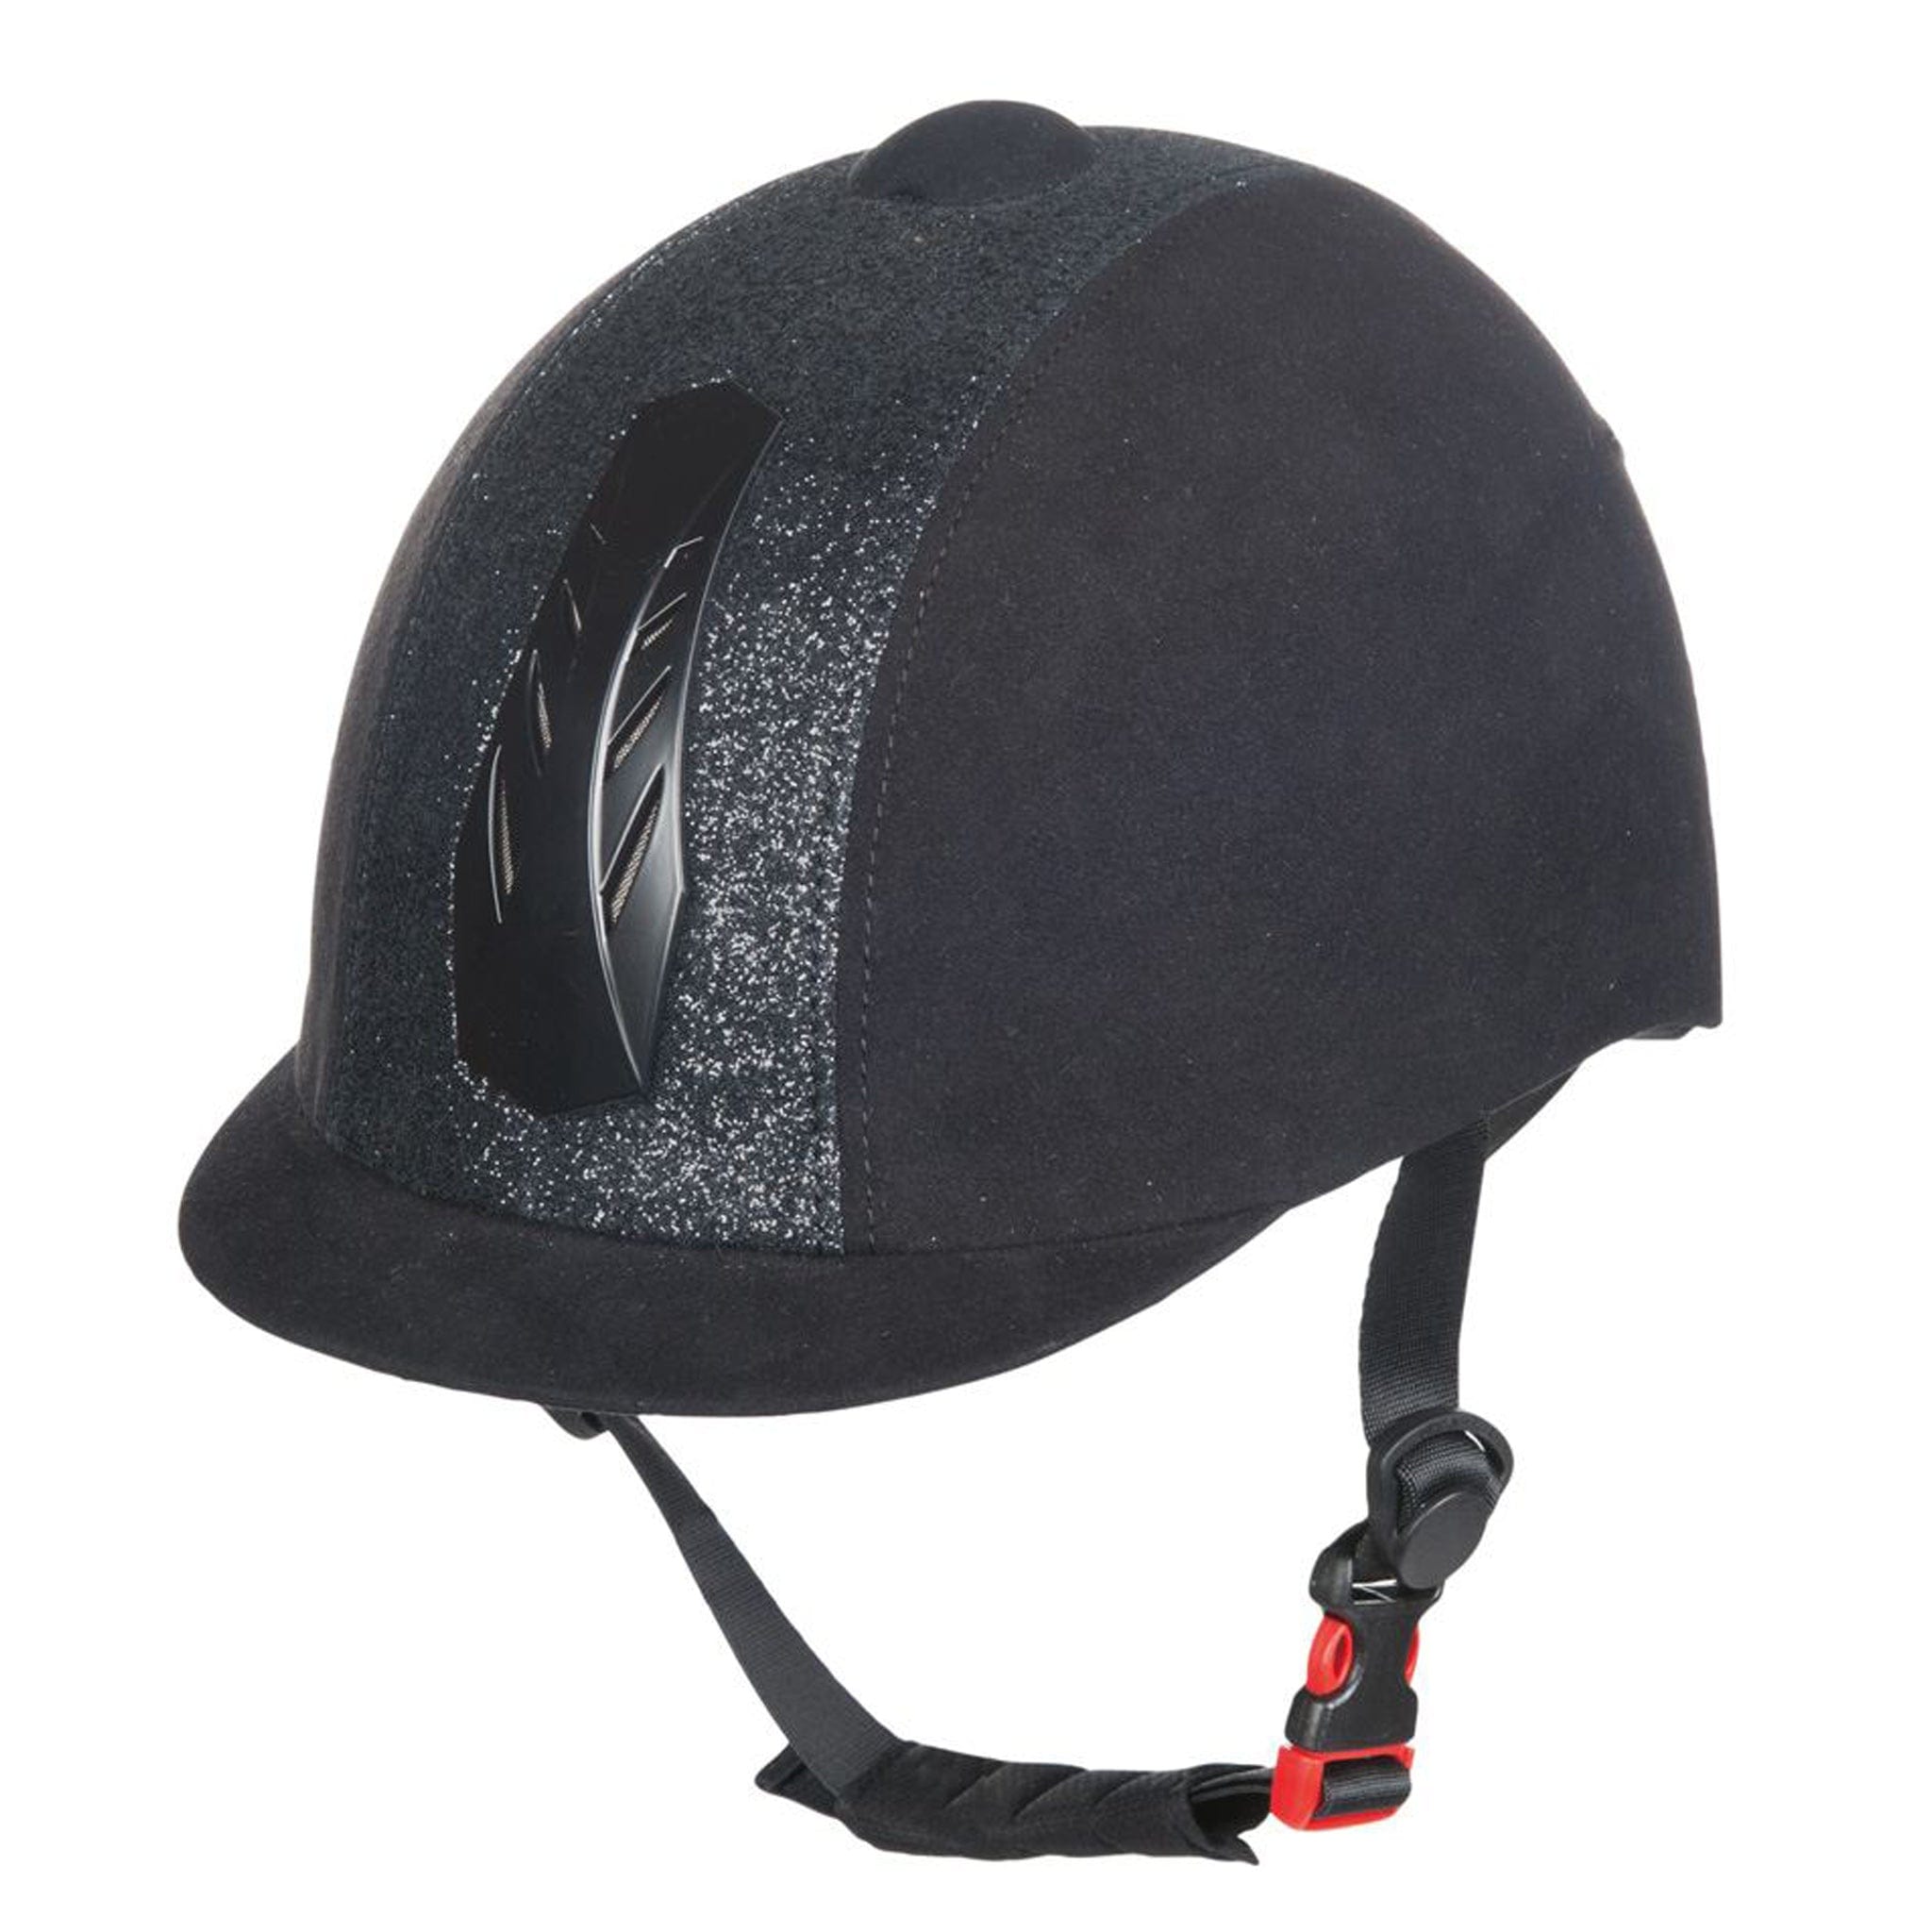 HKM Star Riding Hat 8626 Black Front View